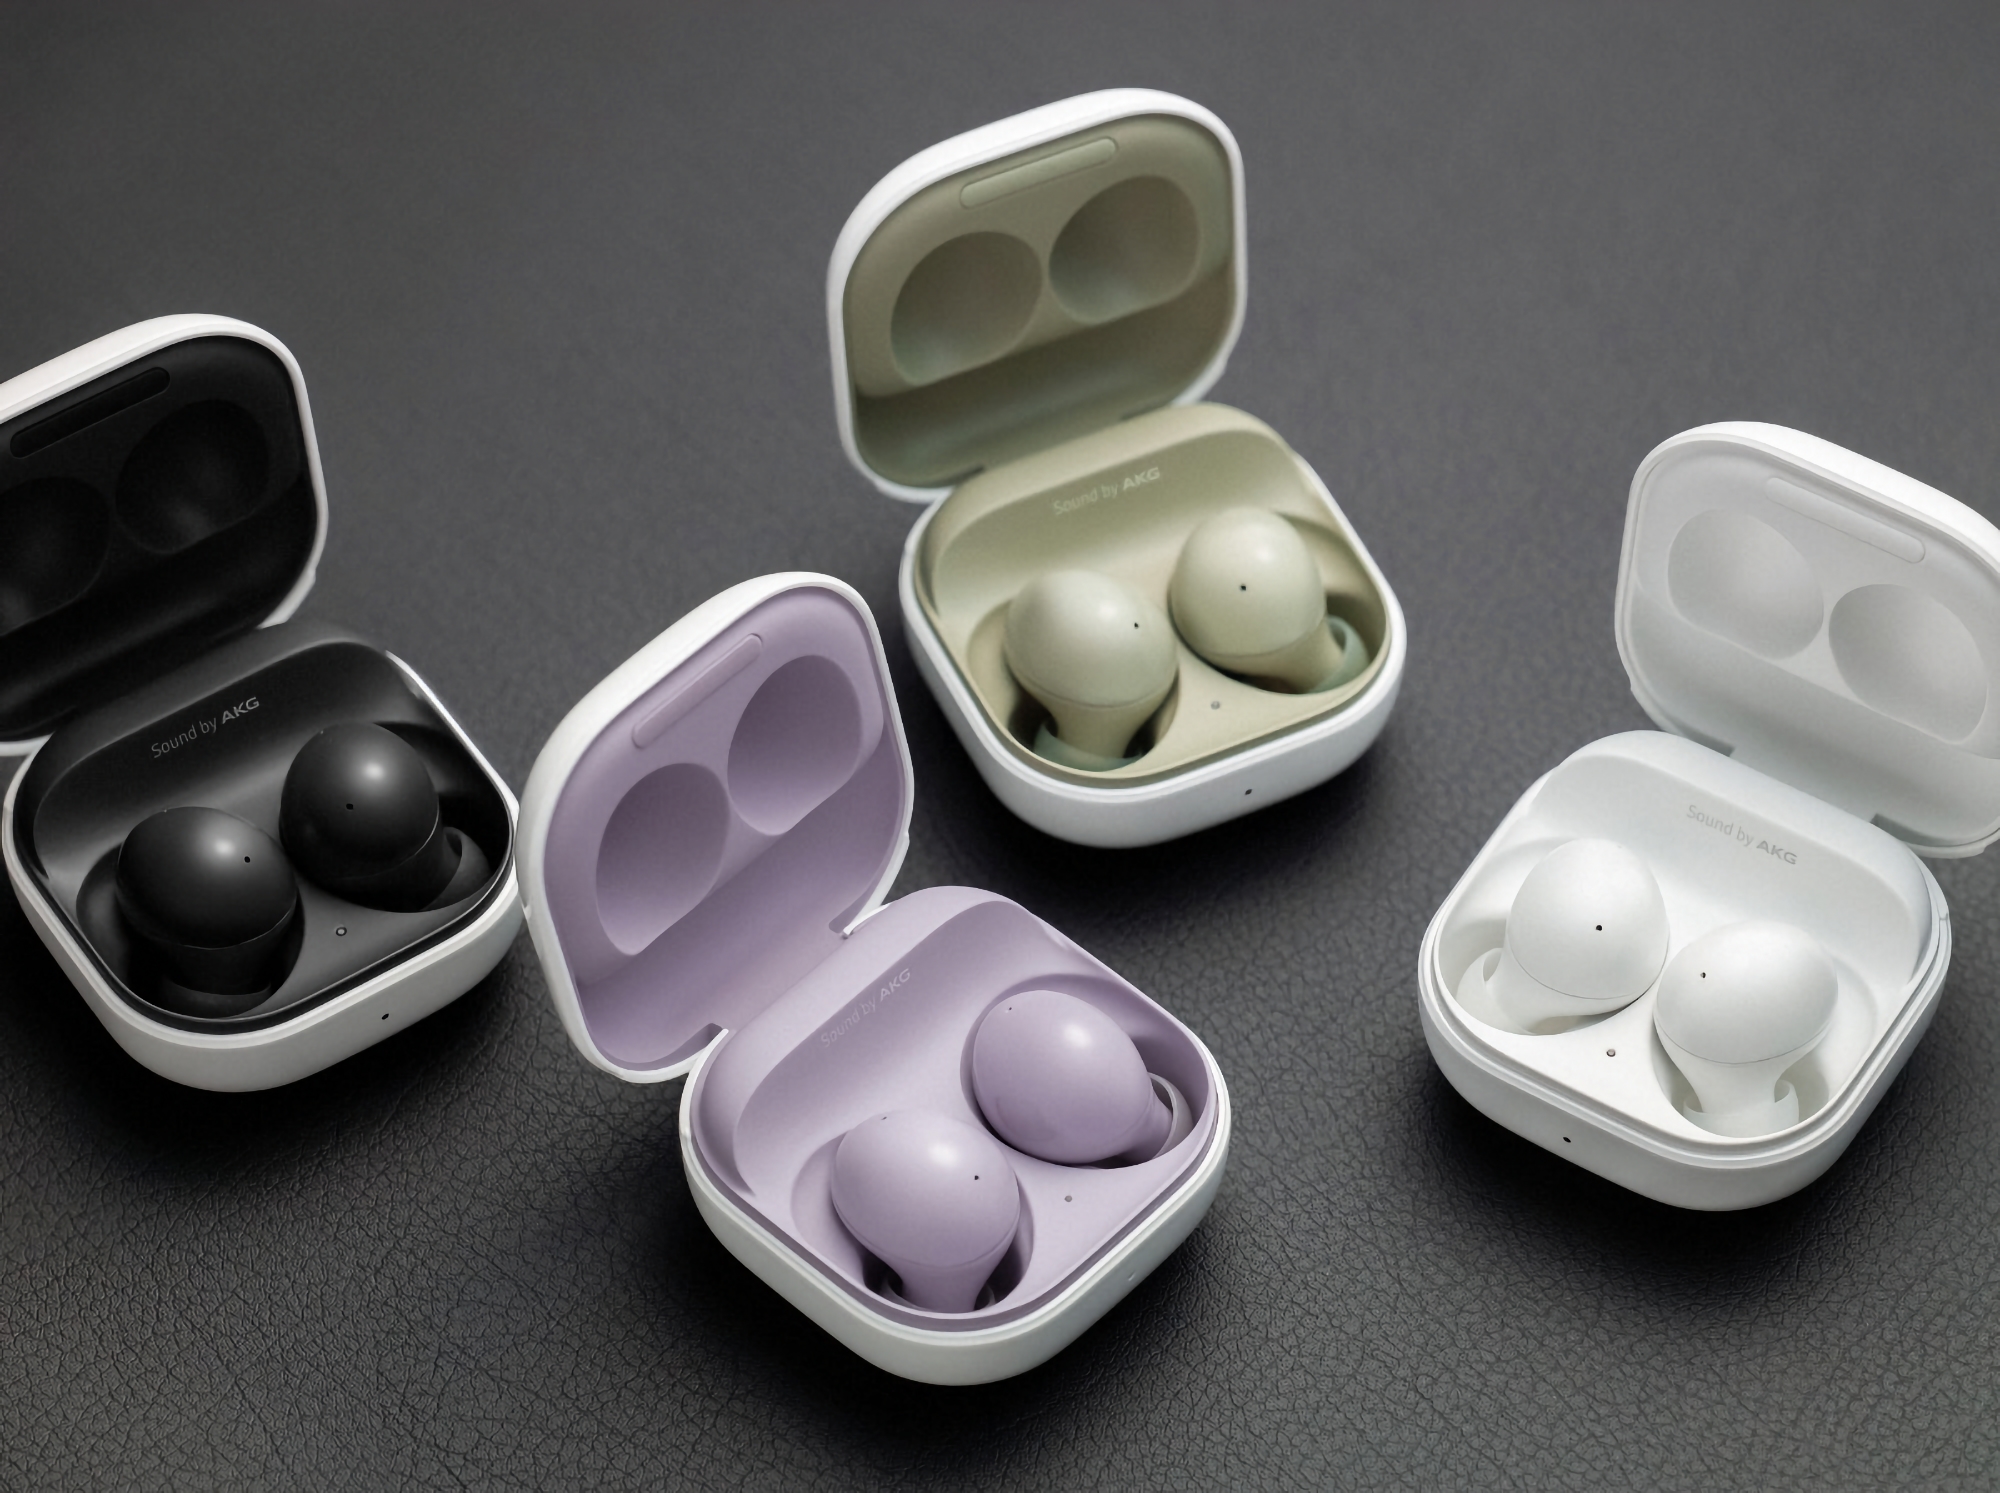 Samsung Galaxy Buds 2 are available on Amazon with a $50 discount